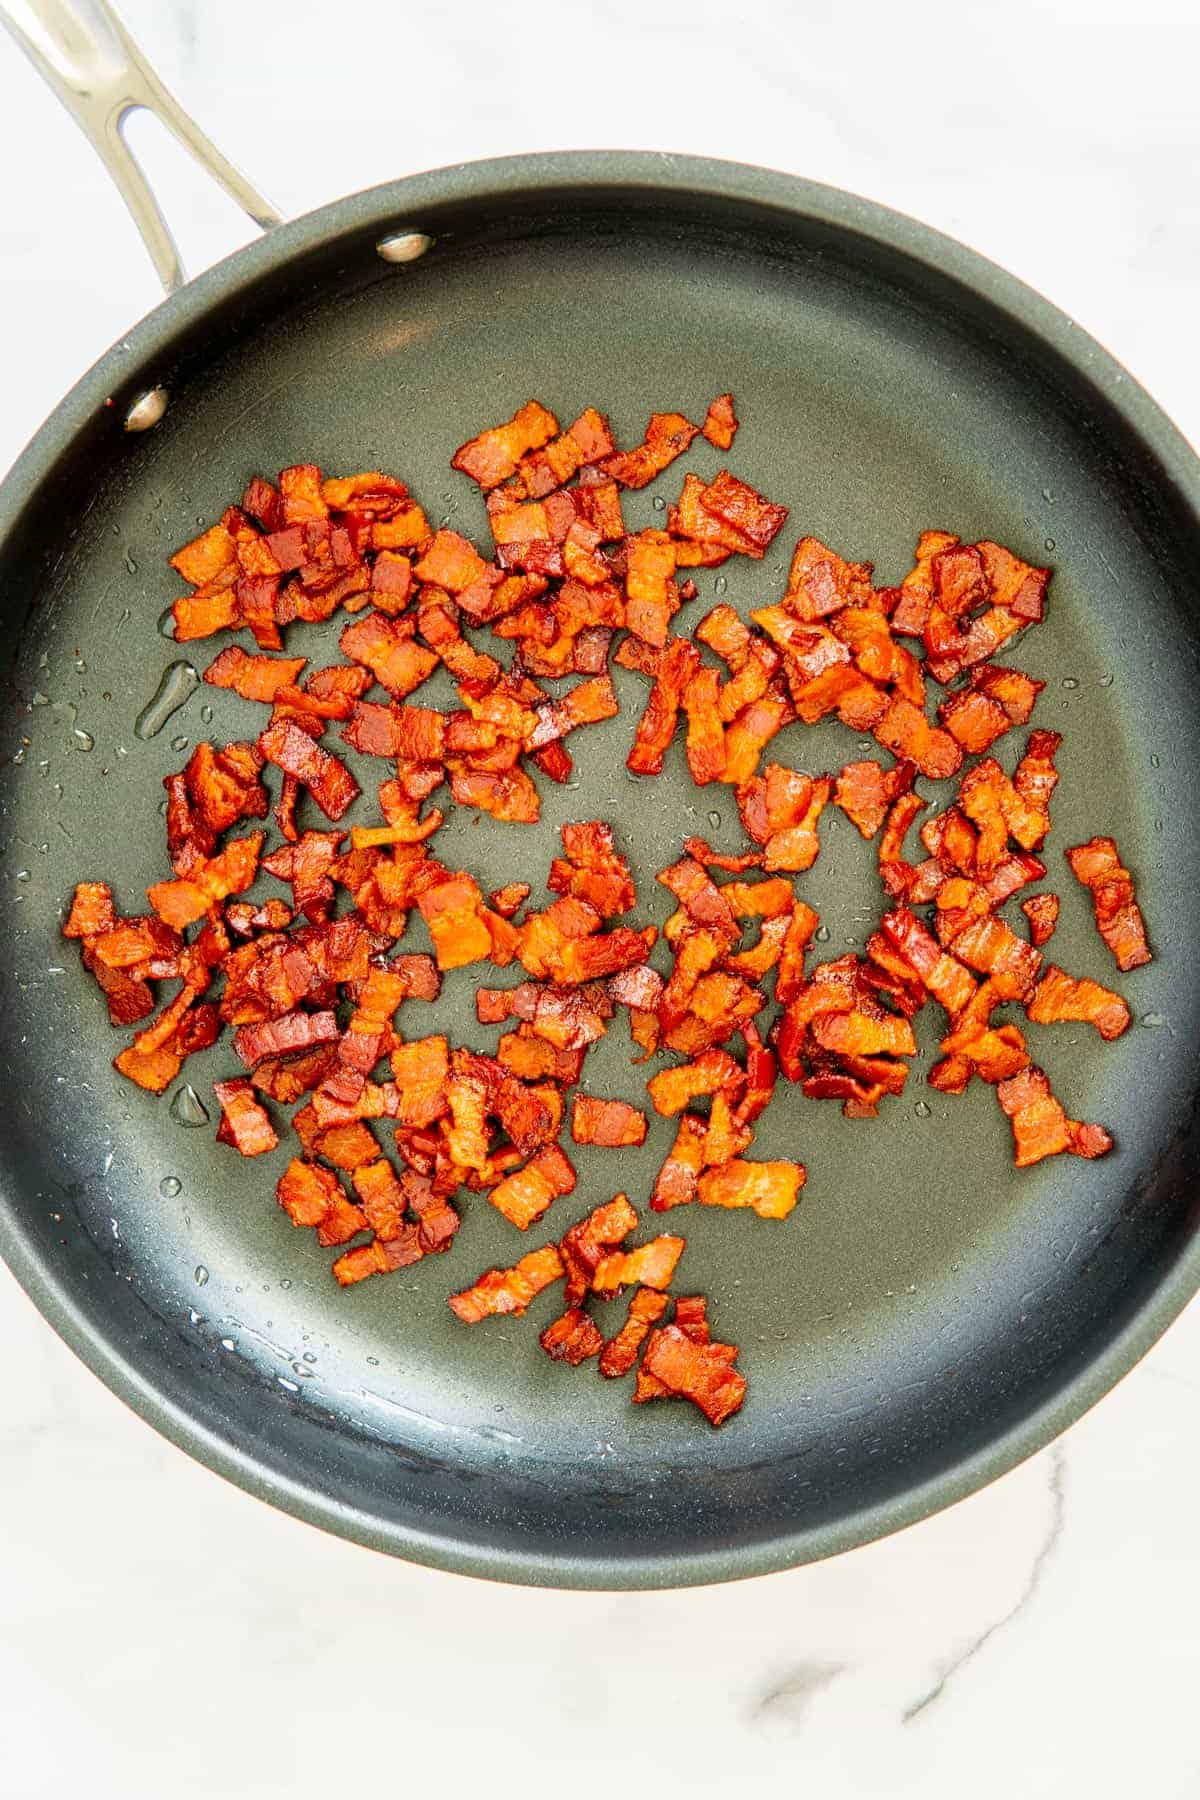 Drained cooked bacon in a frypan.